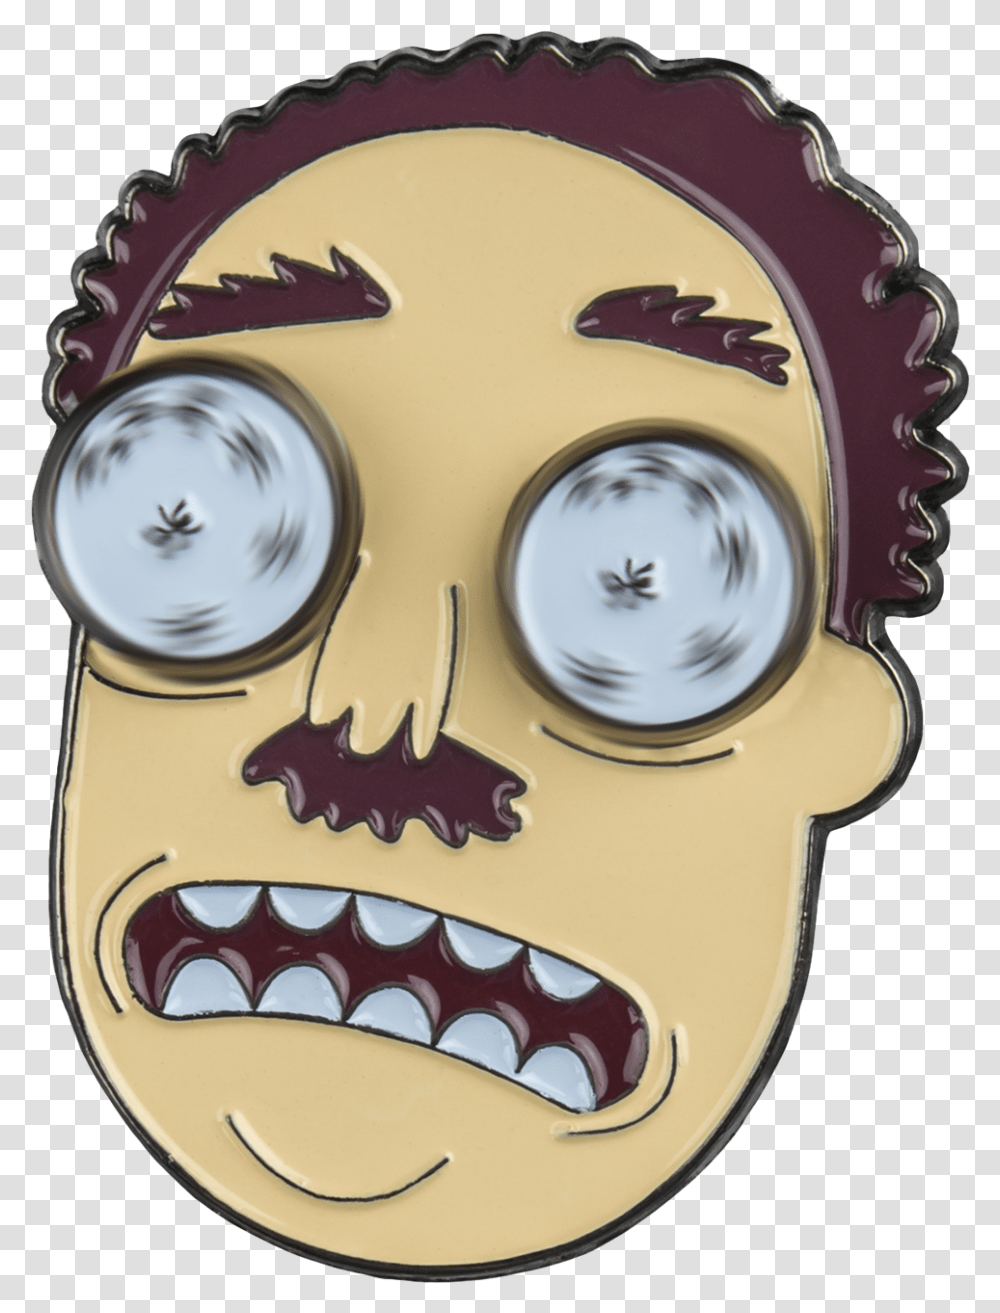 Rick And Morty Ants In My Eyes Johnson, Disk, Clock Tower, Building, Wristwatch Transparent Png